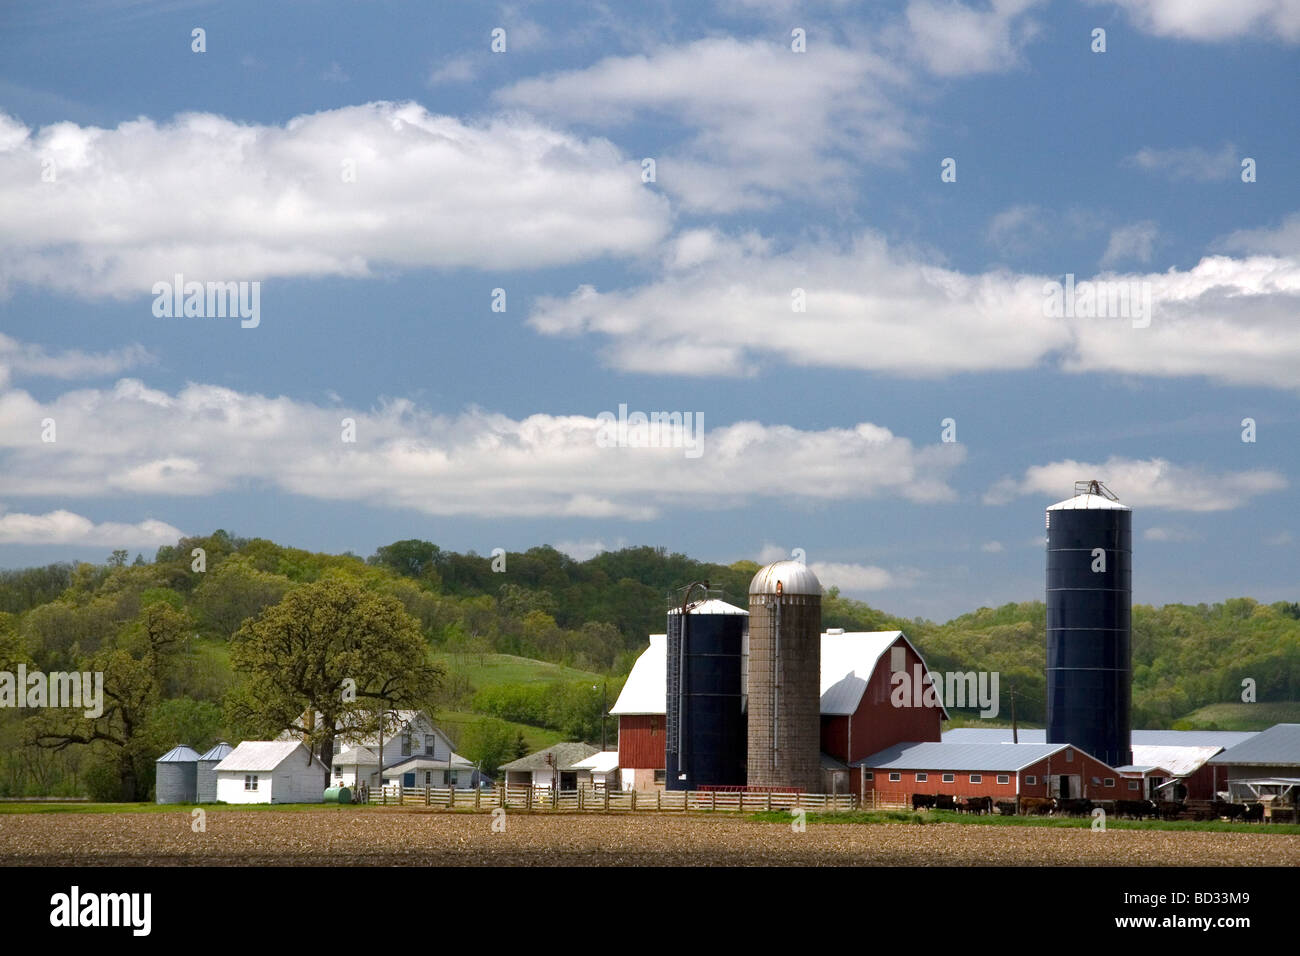 Red barn and grain silos on a farm in Manitowoc County Wisconsin USA  Stock Photo